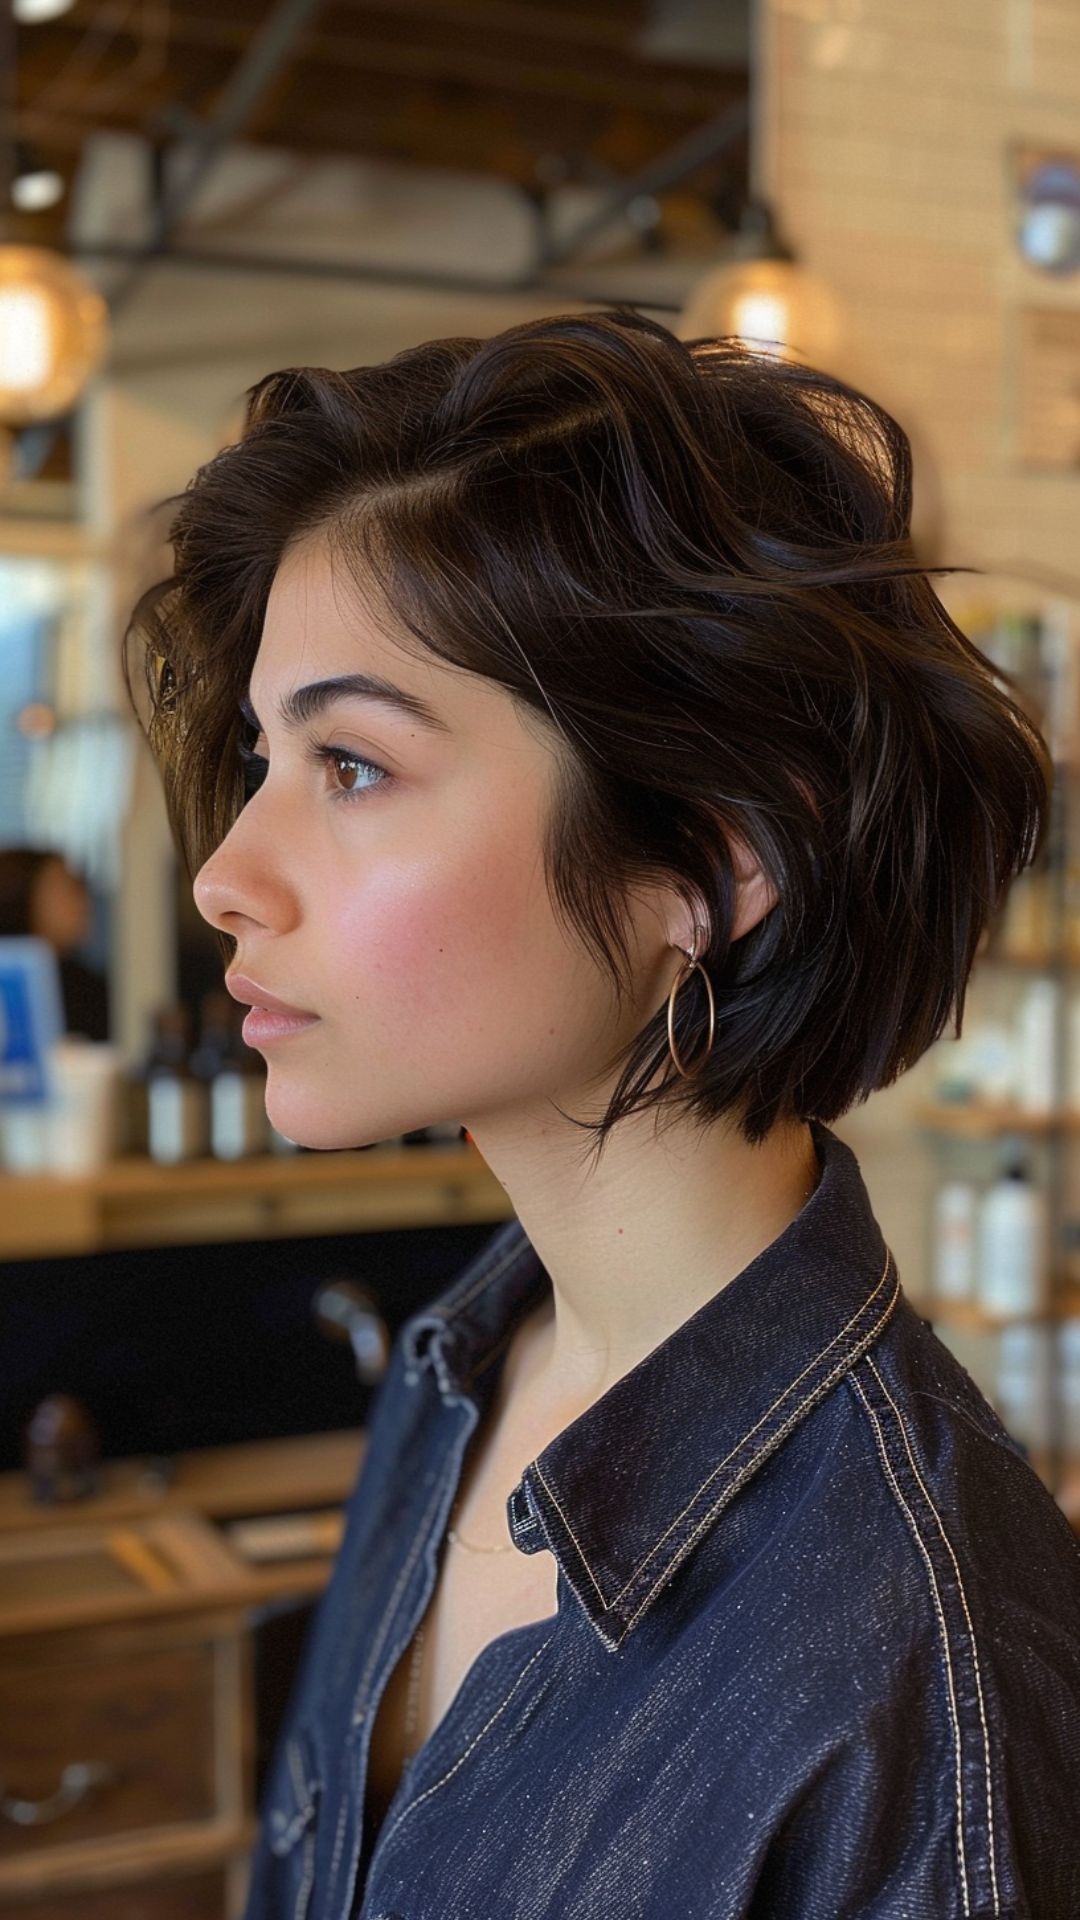 Chic and Trendy: The Best Hairstyles for Short Hair